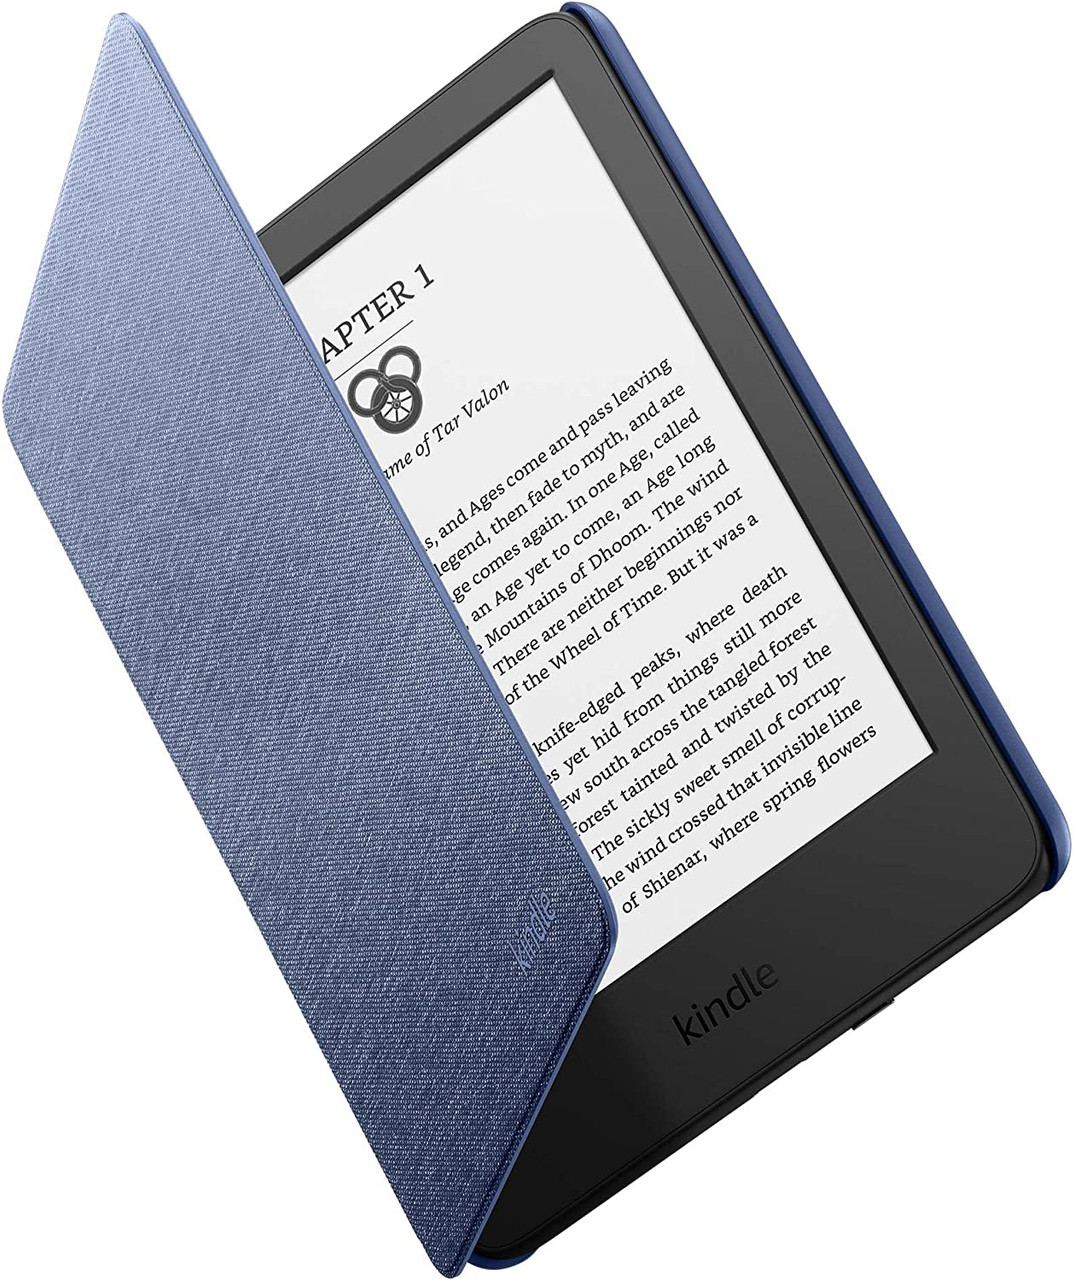  MoKo Case Fits 6 All-New Kindle (11th Generation-2022